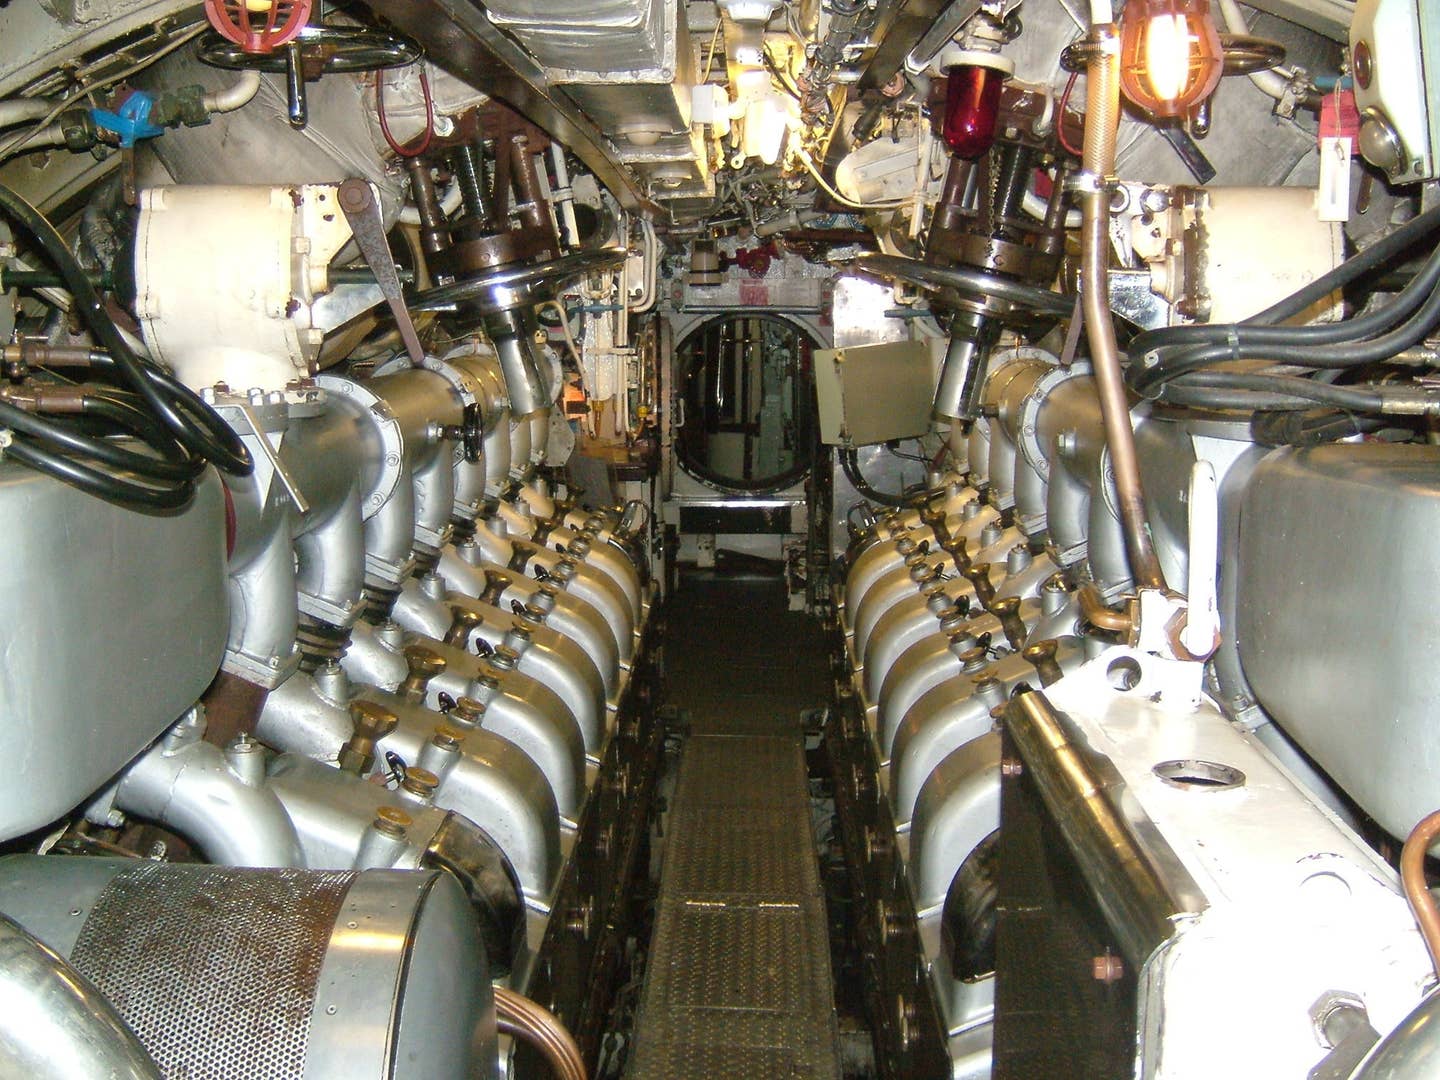 The diesel engines of the former HMS Ocelot, an English submarine decommissioned in 1991. The diesel engines charged batteries that were used for undersea operations.<br>(ClemRutter, CC BY-SA 2.5)